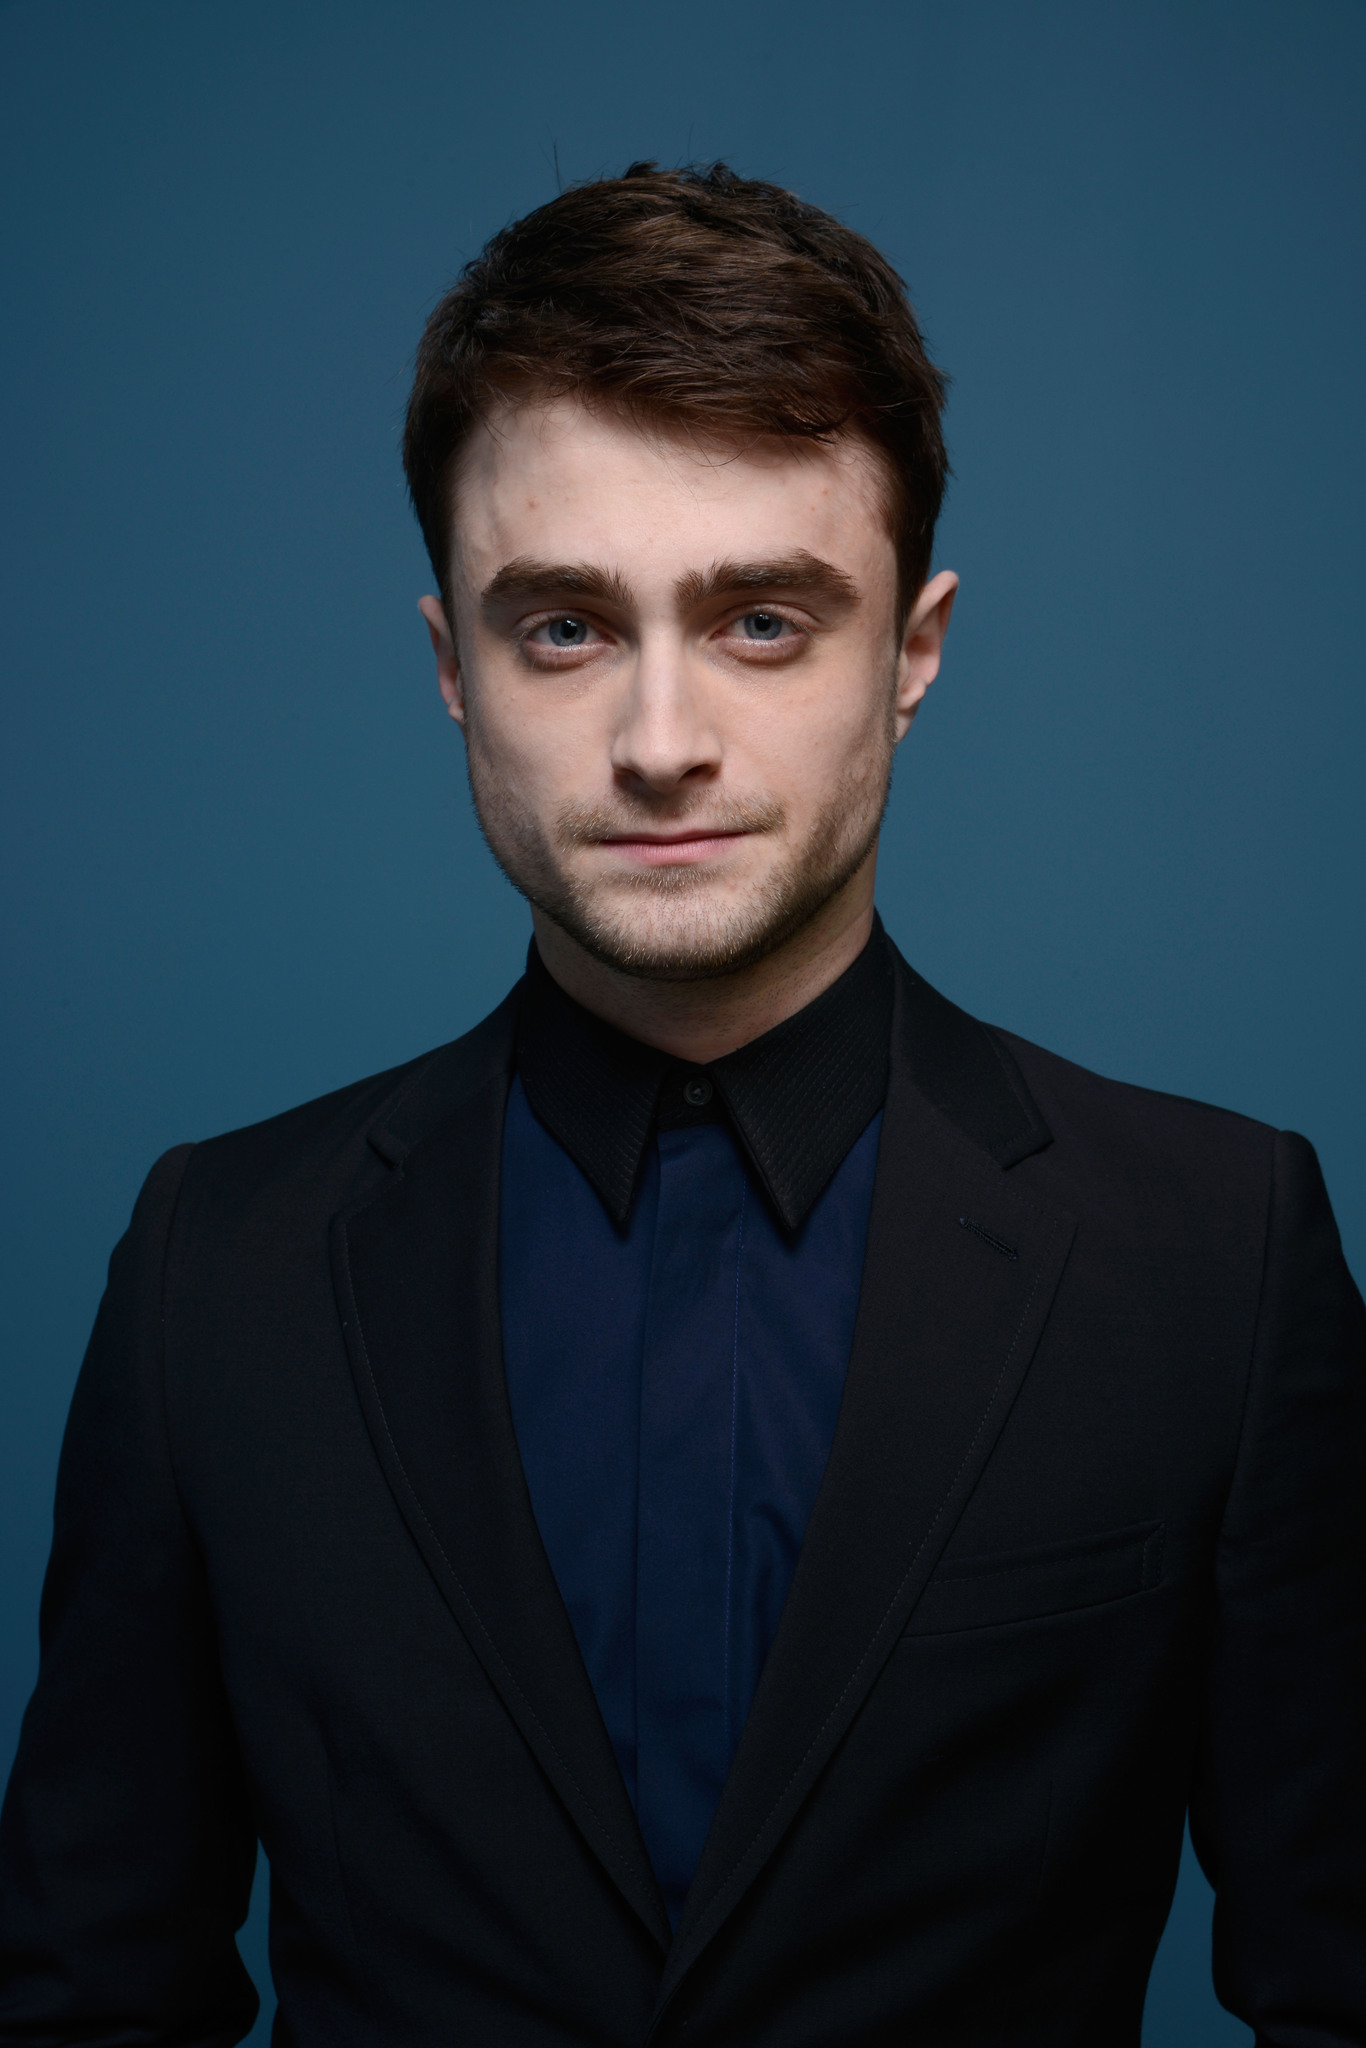 Daniel Radcliffe at event of Horns (2013)